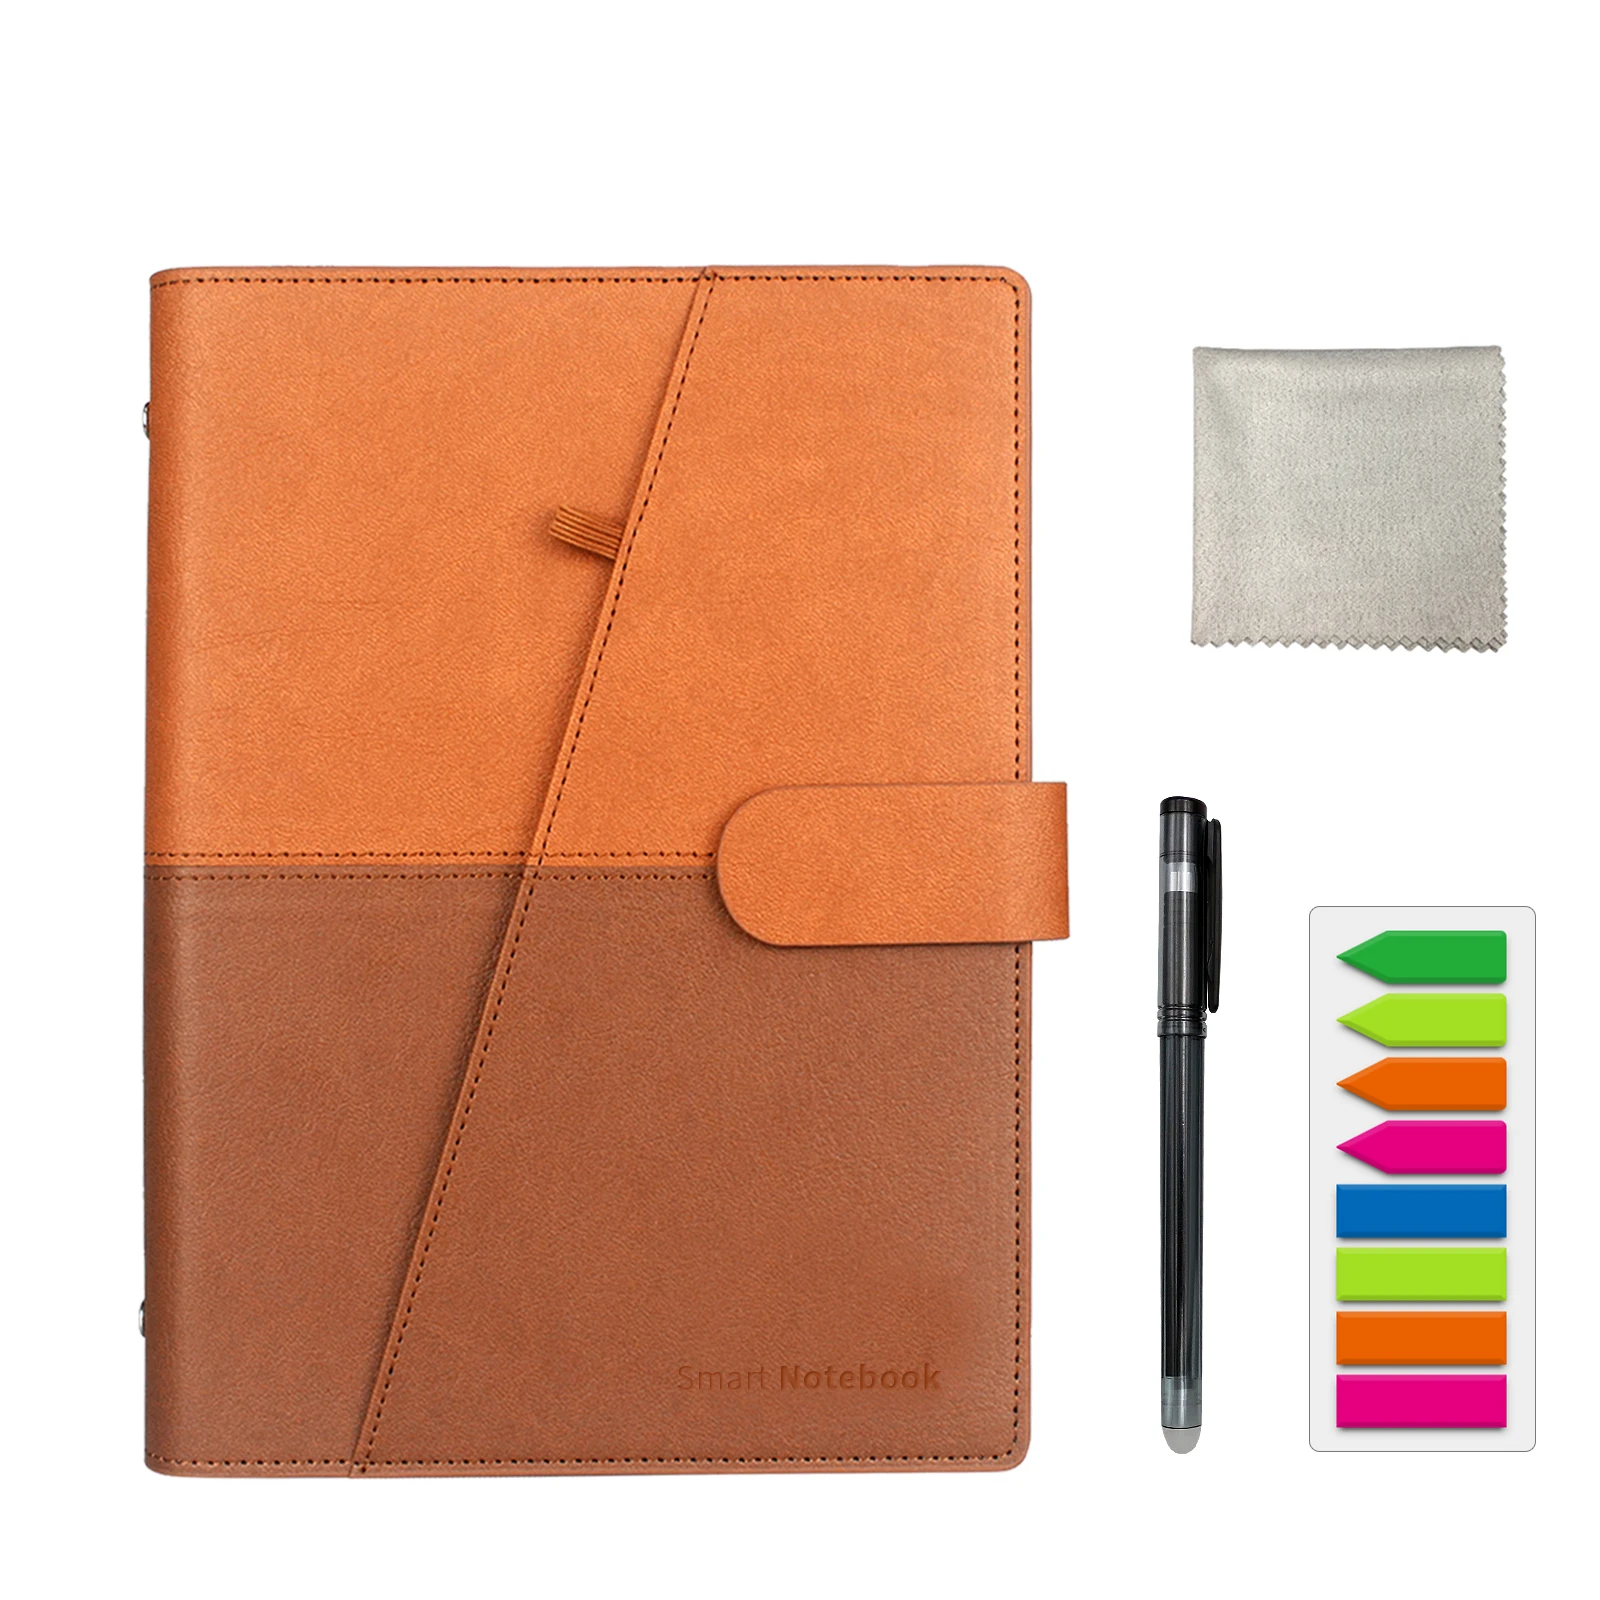 Dropshipping Erasable Notebook Paper Leather Reusable Smart Notebook Cloud Storage Flash Storage